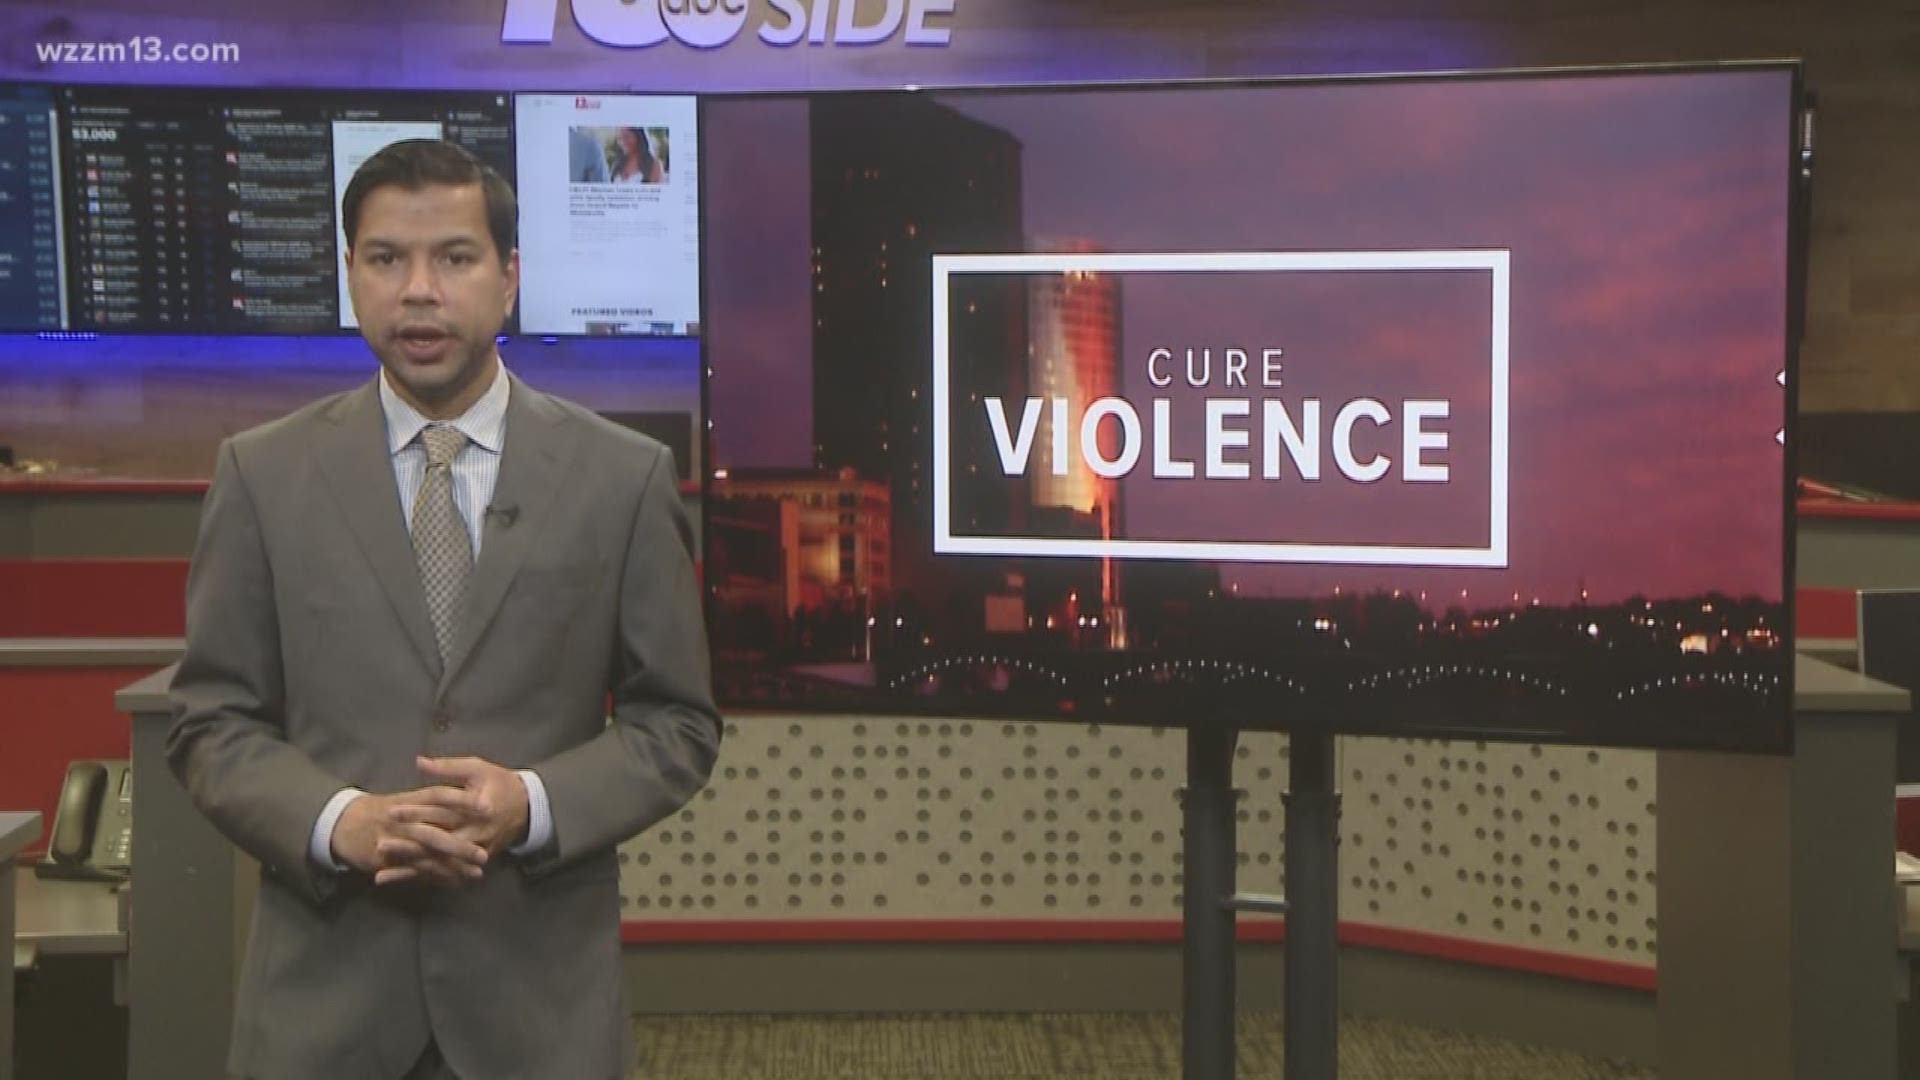 City of Grand Rapids considering new approach to curing violence